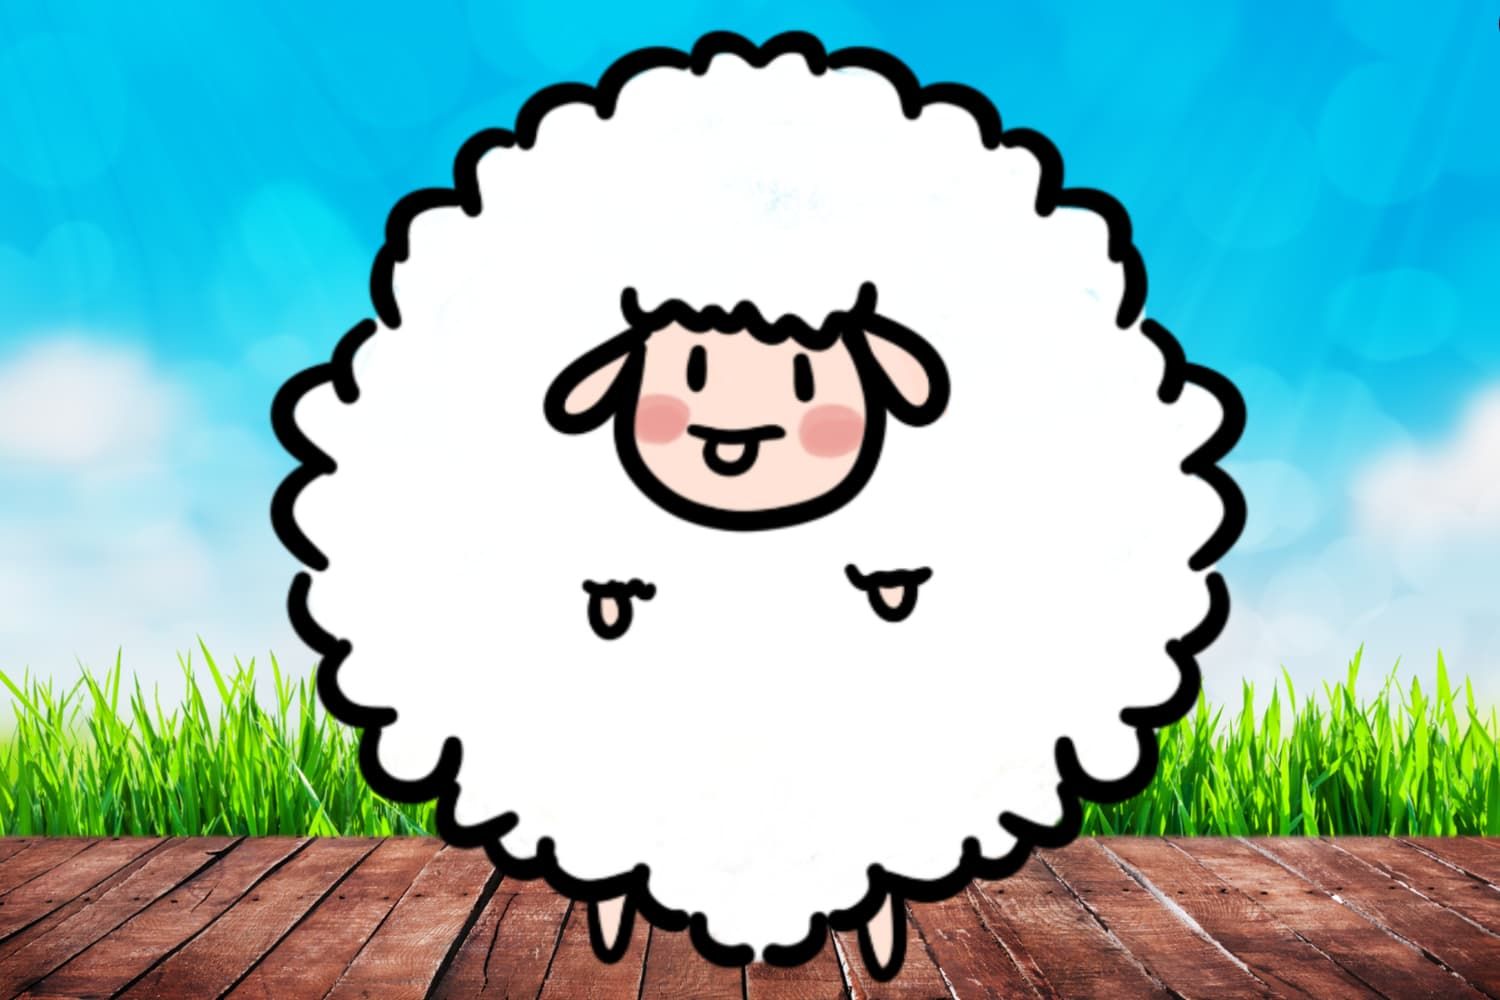 Walk-in%20activity%20-%20OT%20Psalm%2023%20-%20Make%20a%20giant%20sheep-a8365ba0 Safety / security